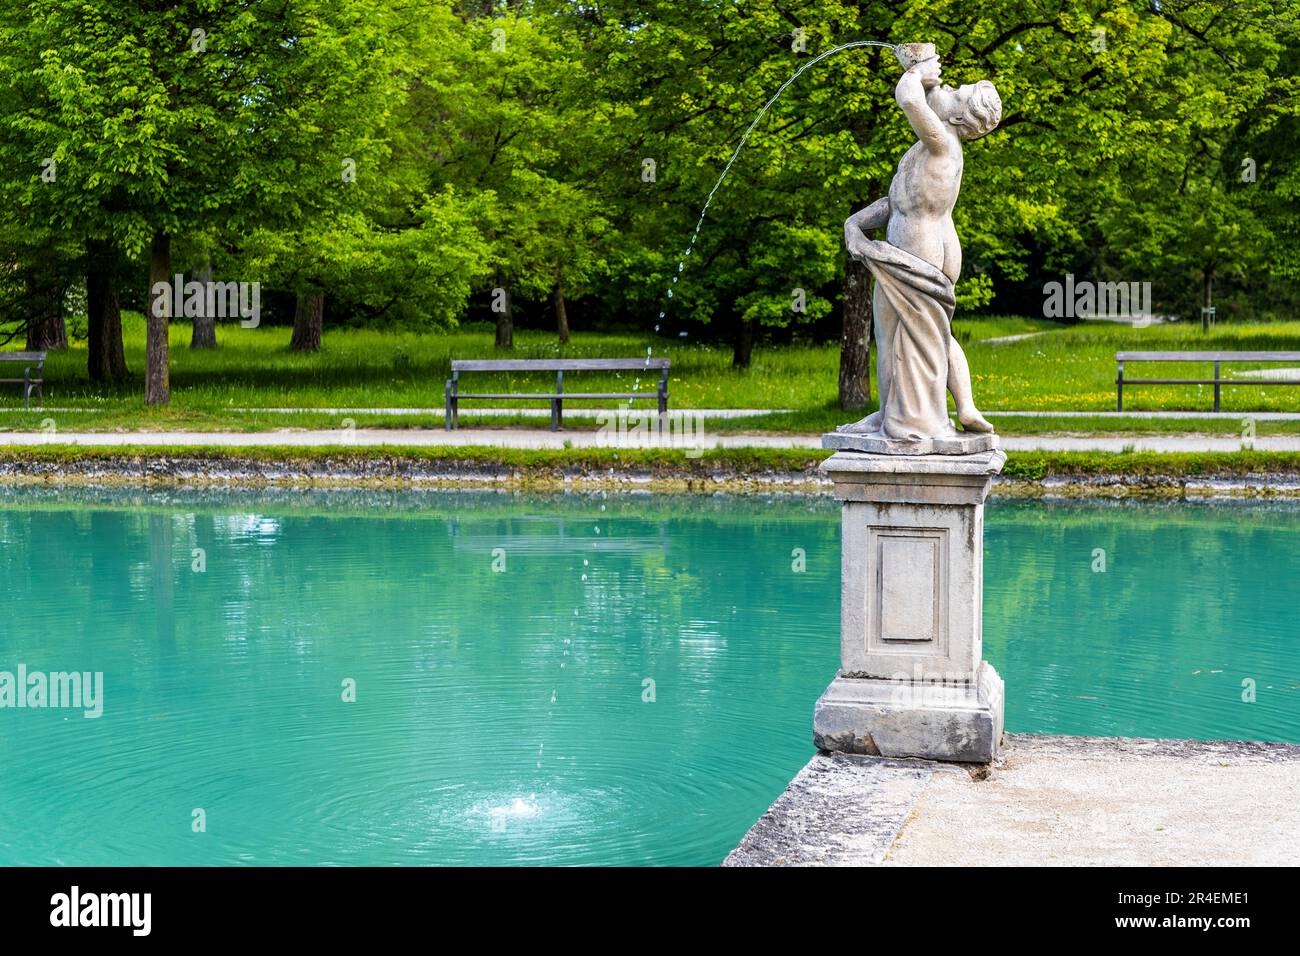 Water spouting sculptures in the park of Hellbrunn Palace in Salzburg, Austria Stock Photo